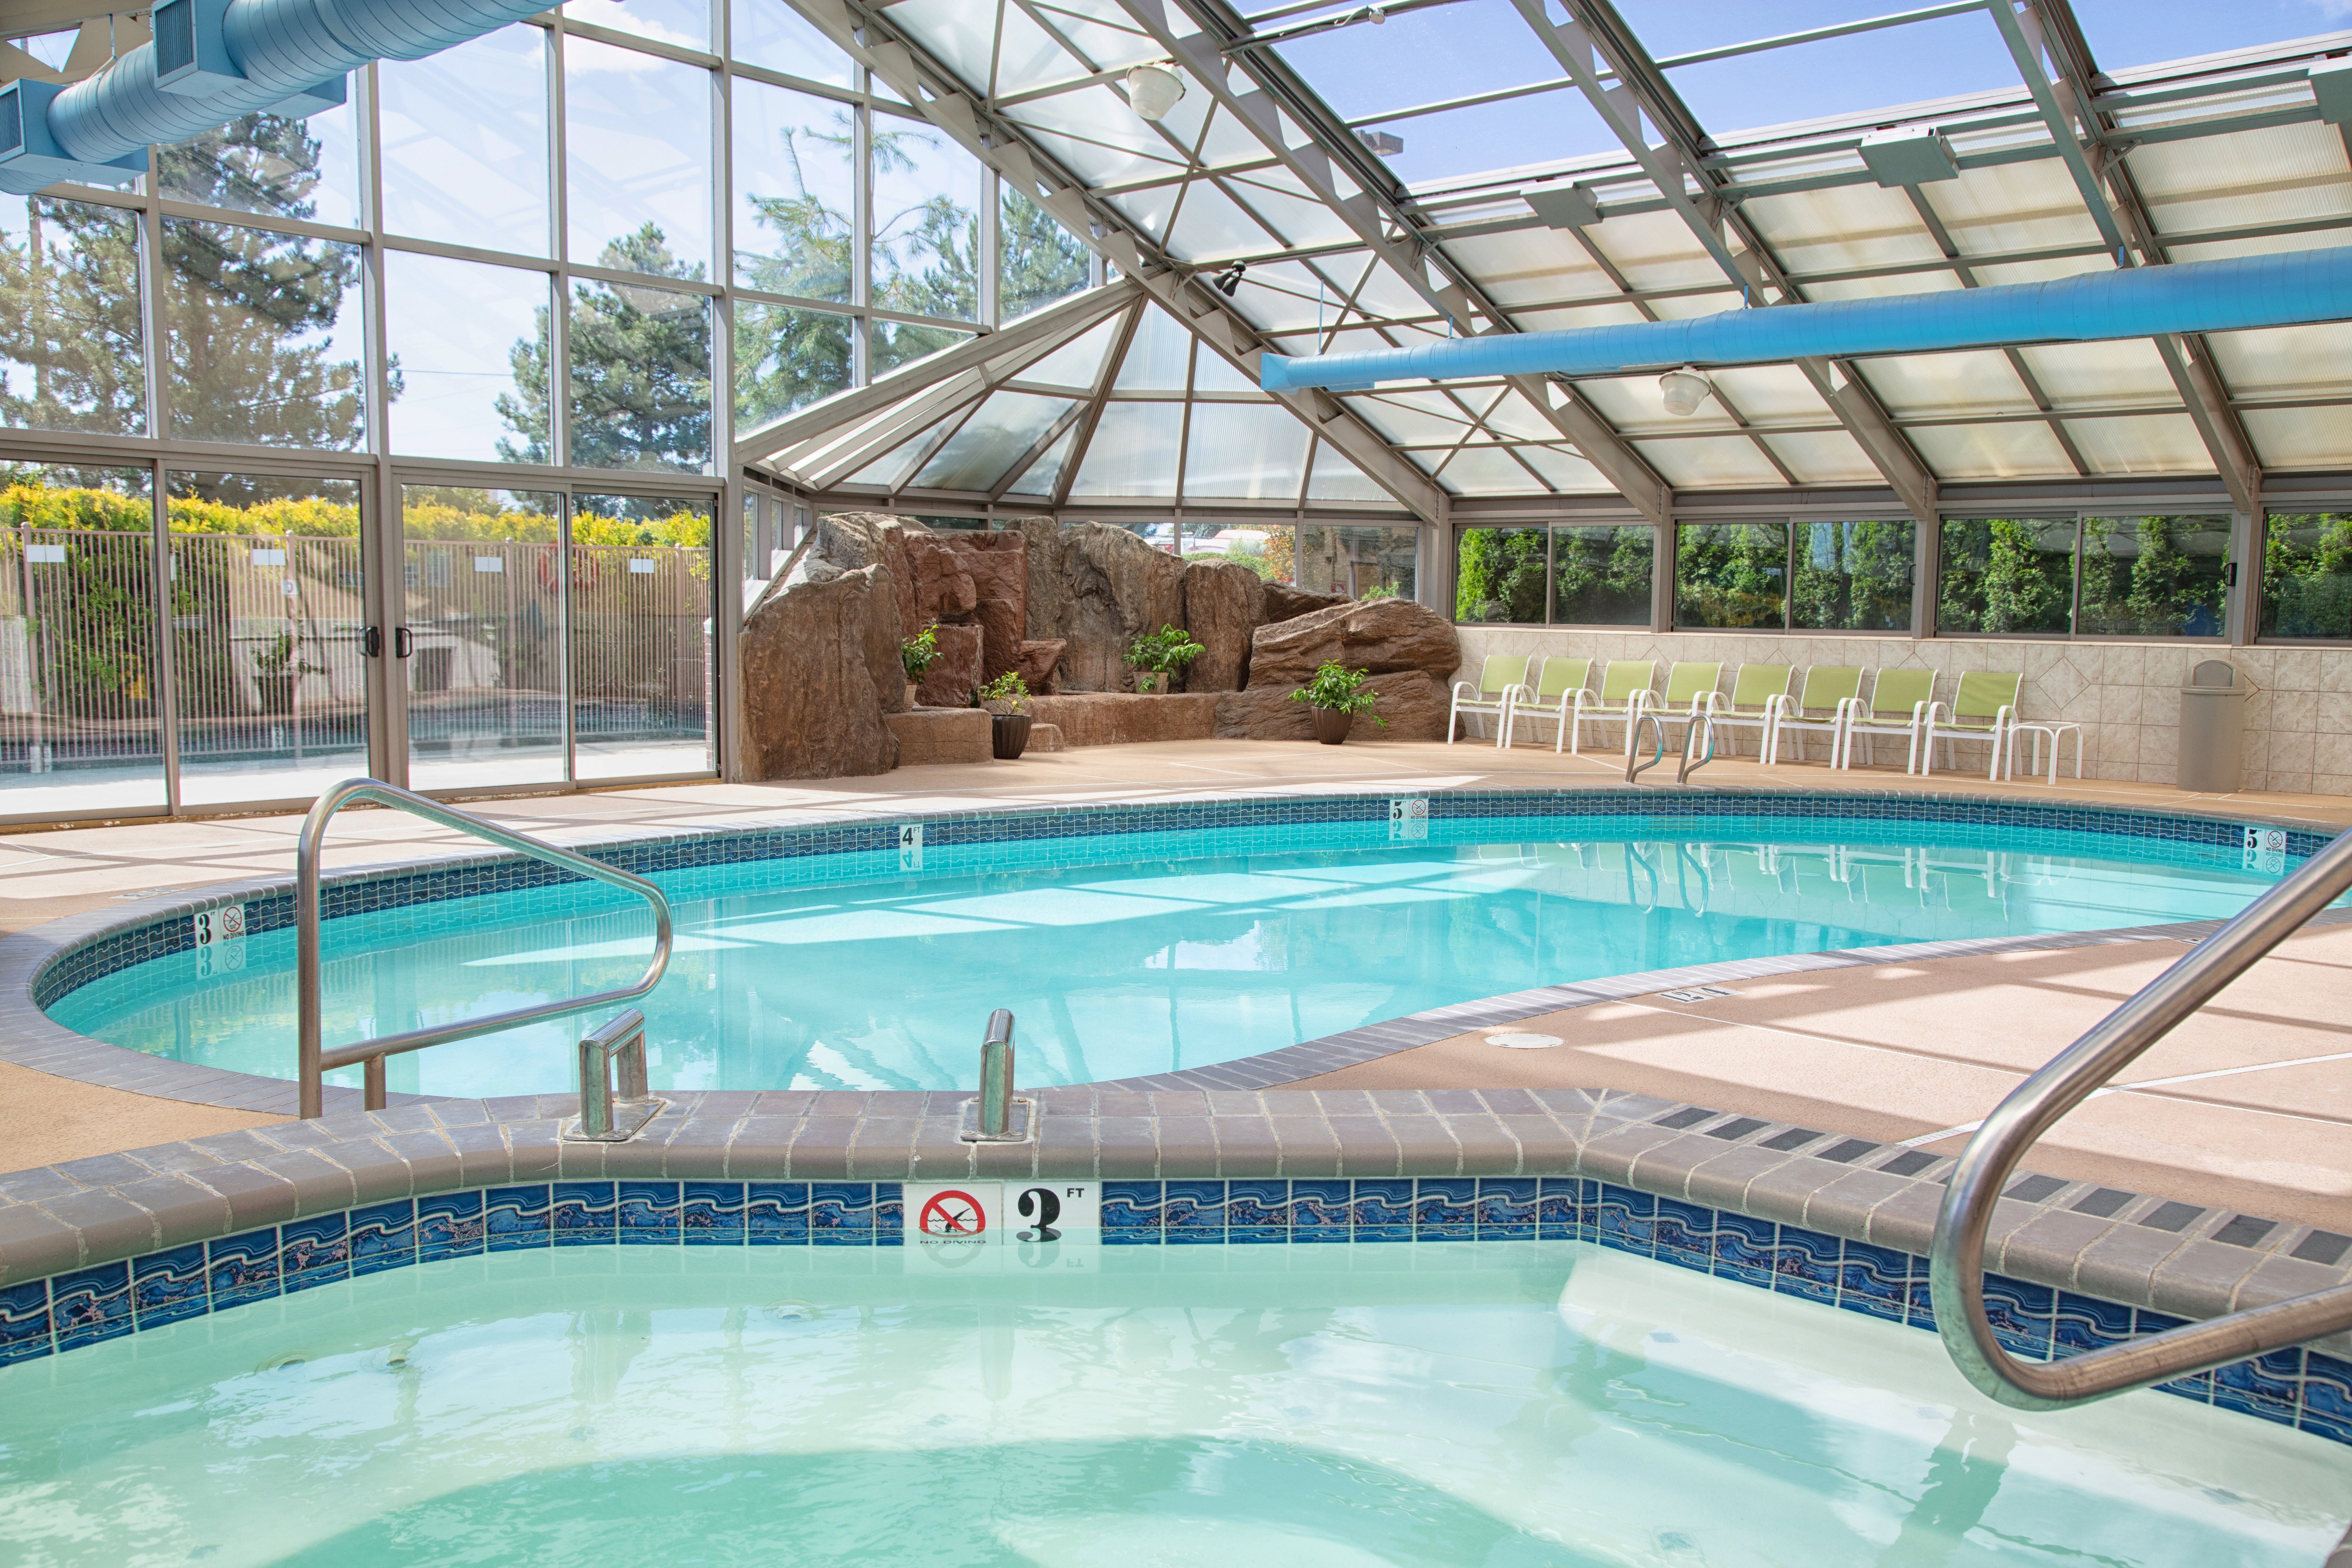 Pool & Spa - Open 24 hrs - Indoors